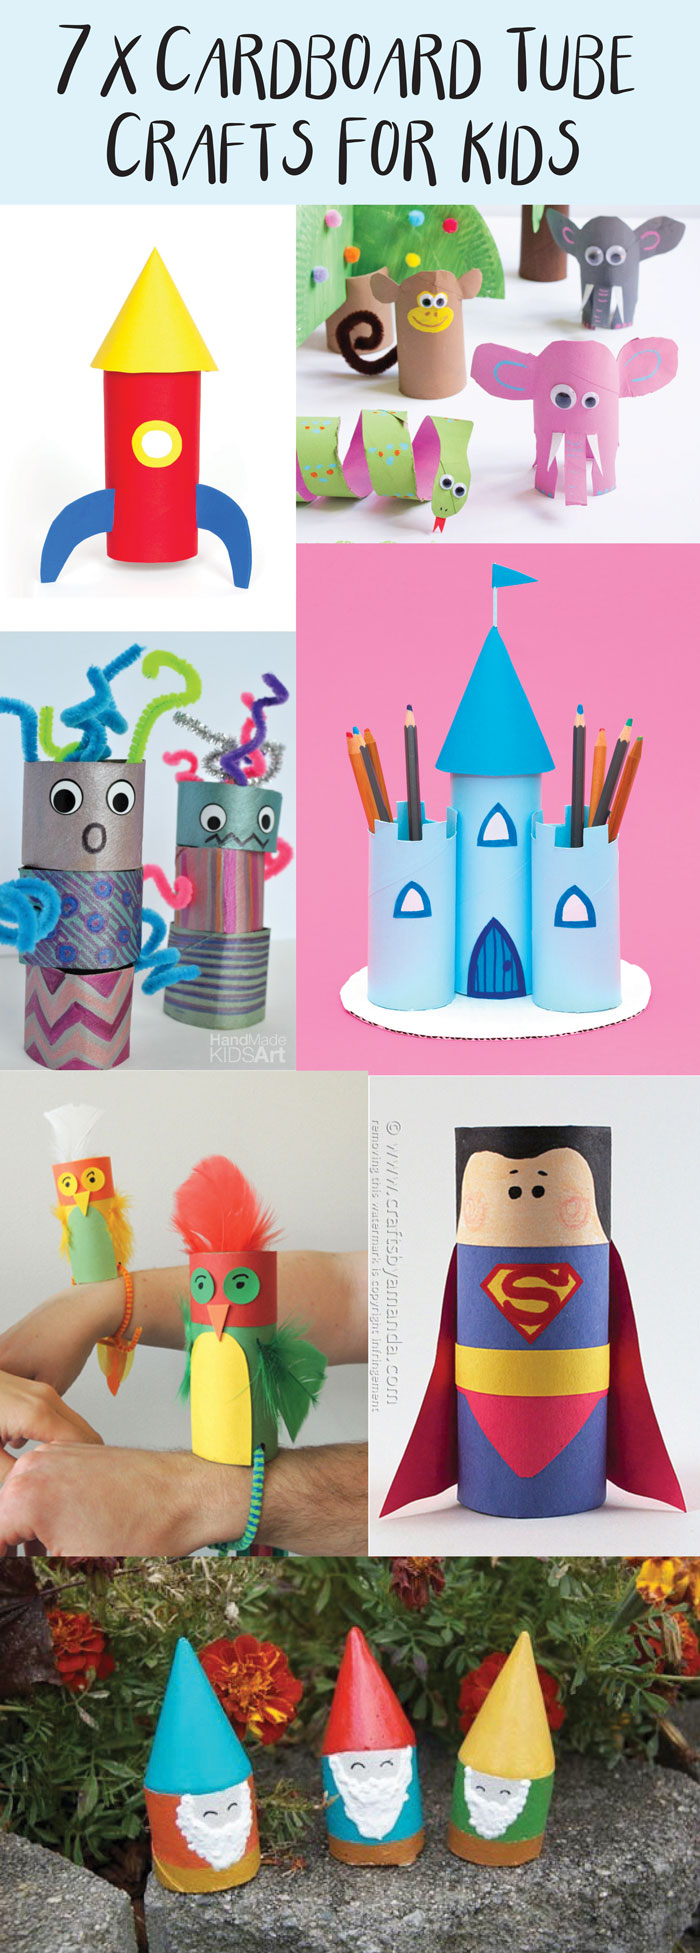 7 x Cardboard Tube Crafts — Doodle and Stitch